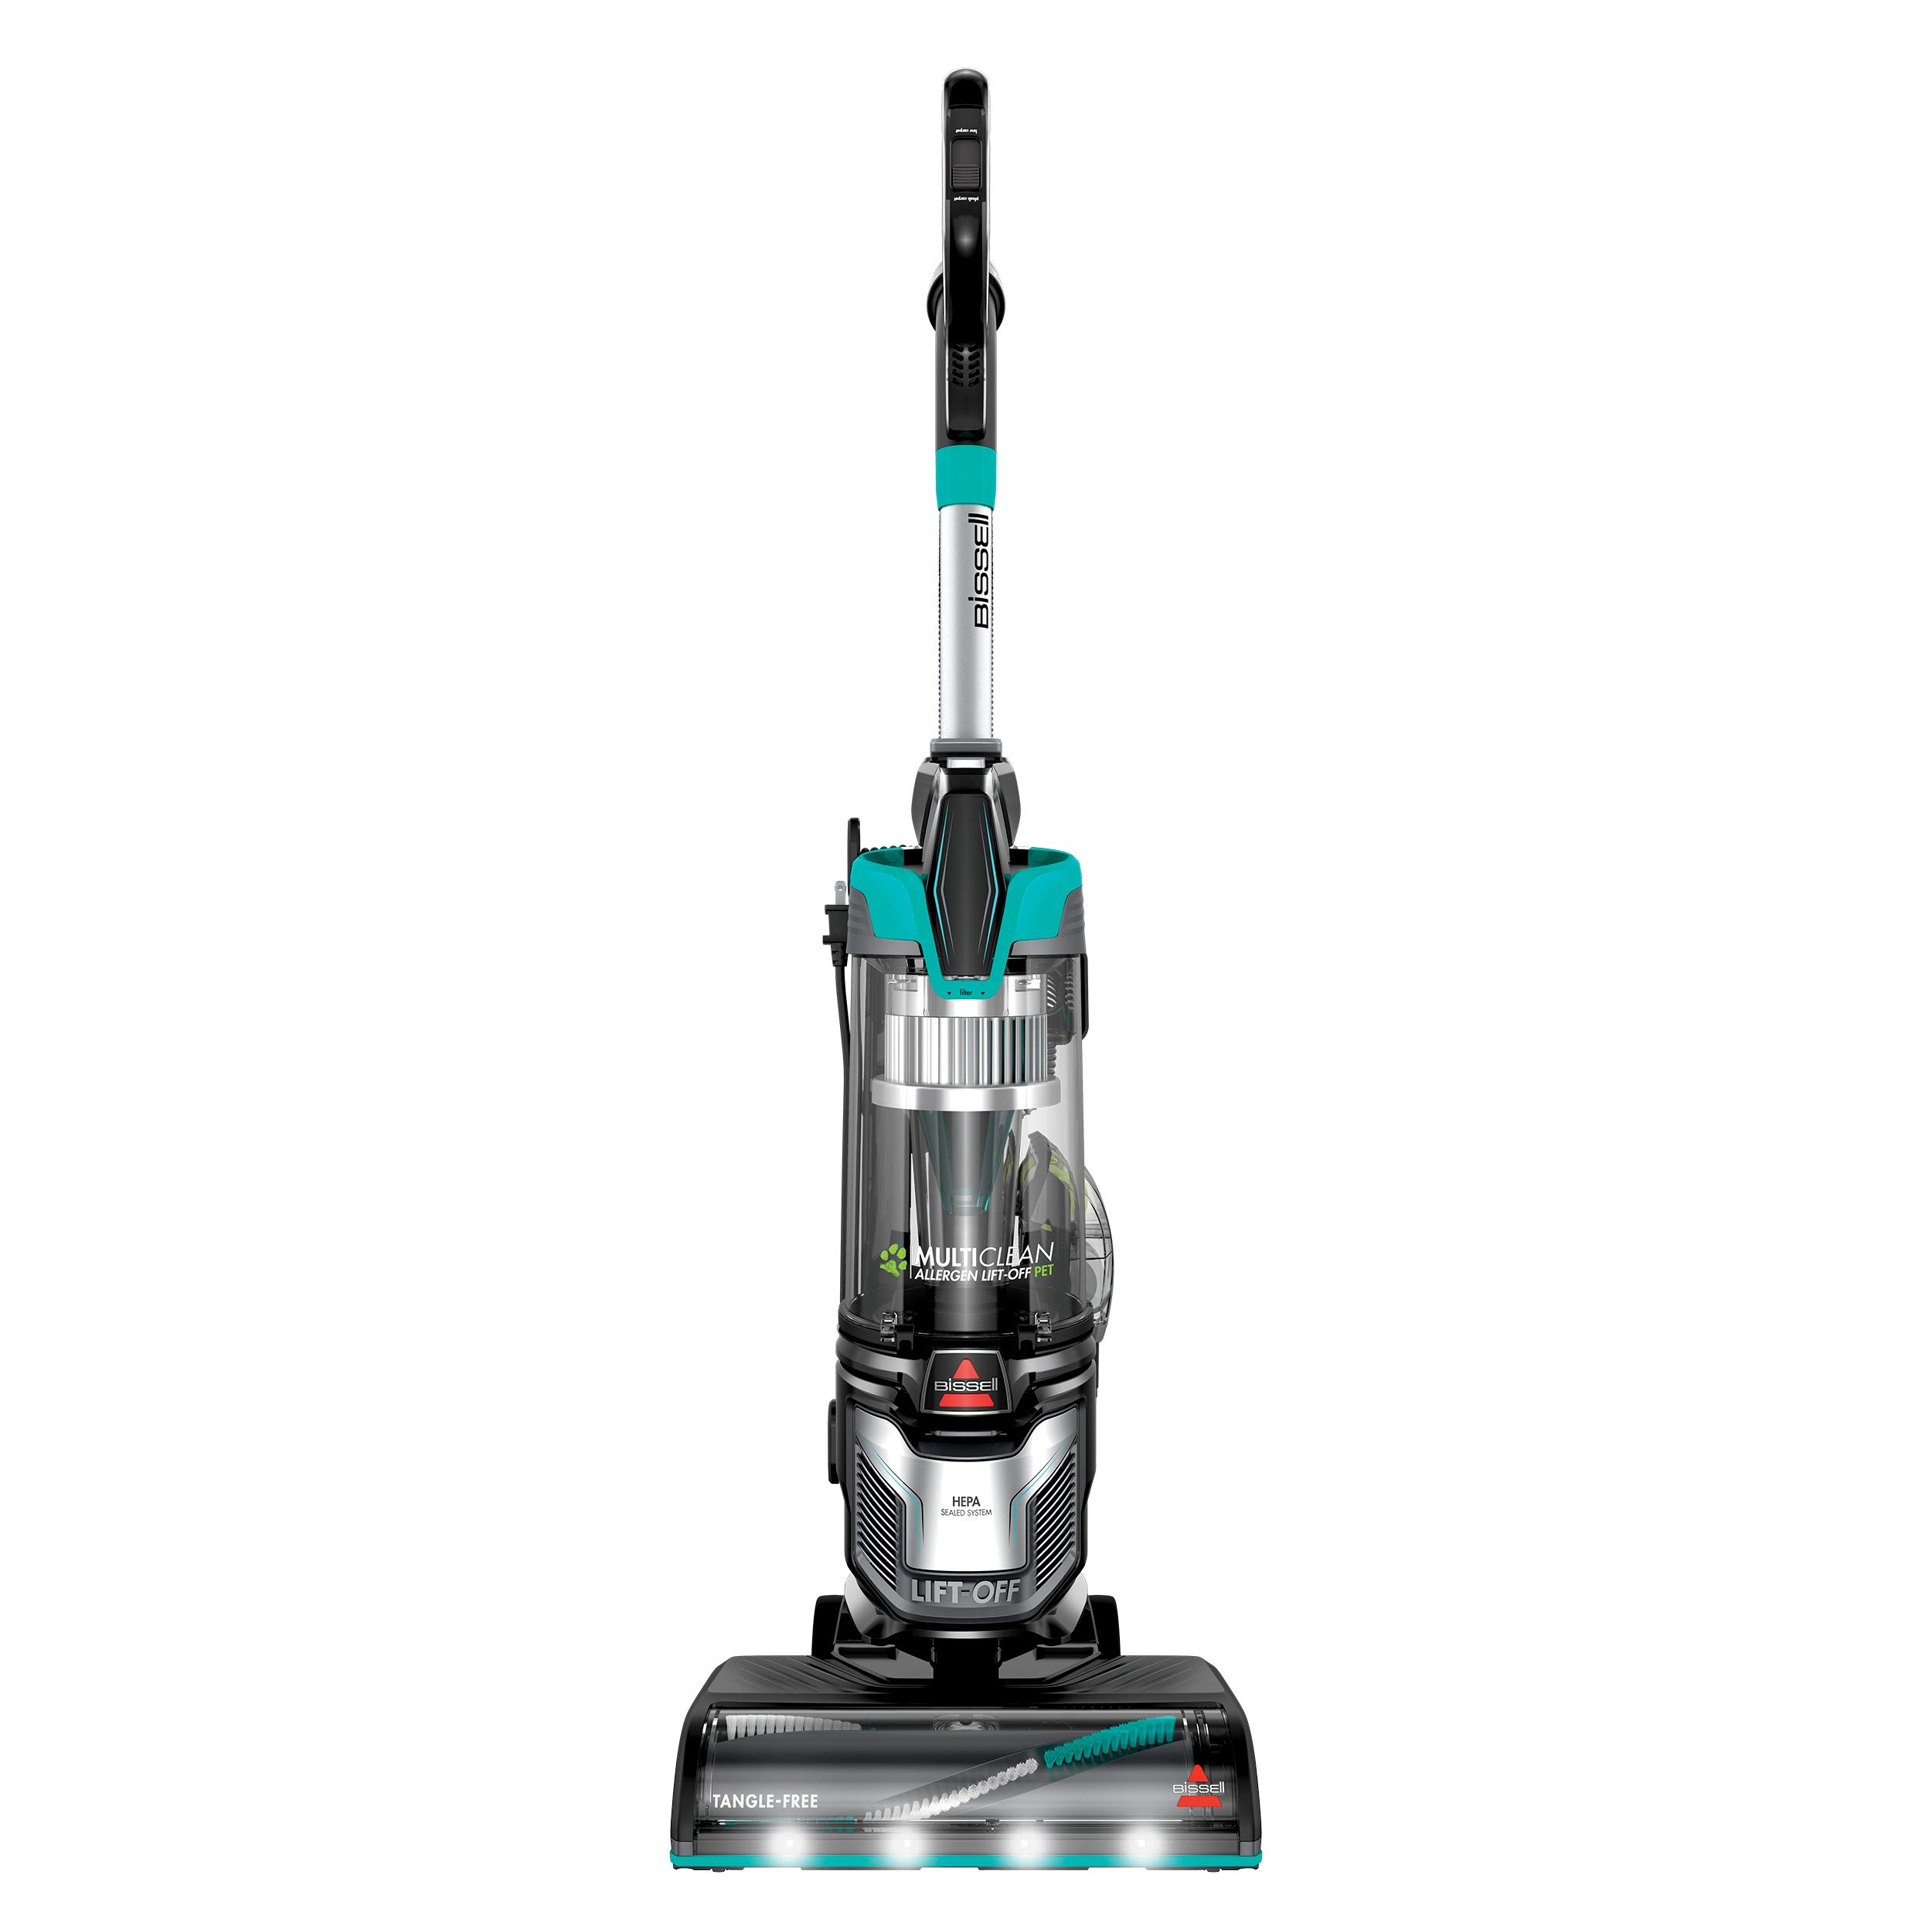 BISSELL 2998 MultiClean Allergen Lift-Off Pet Vacuum with HEPA Filter Sealed System, Lift-Off Portable Pod, LED Headlights, Specialized Pet Tools, ...